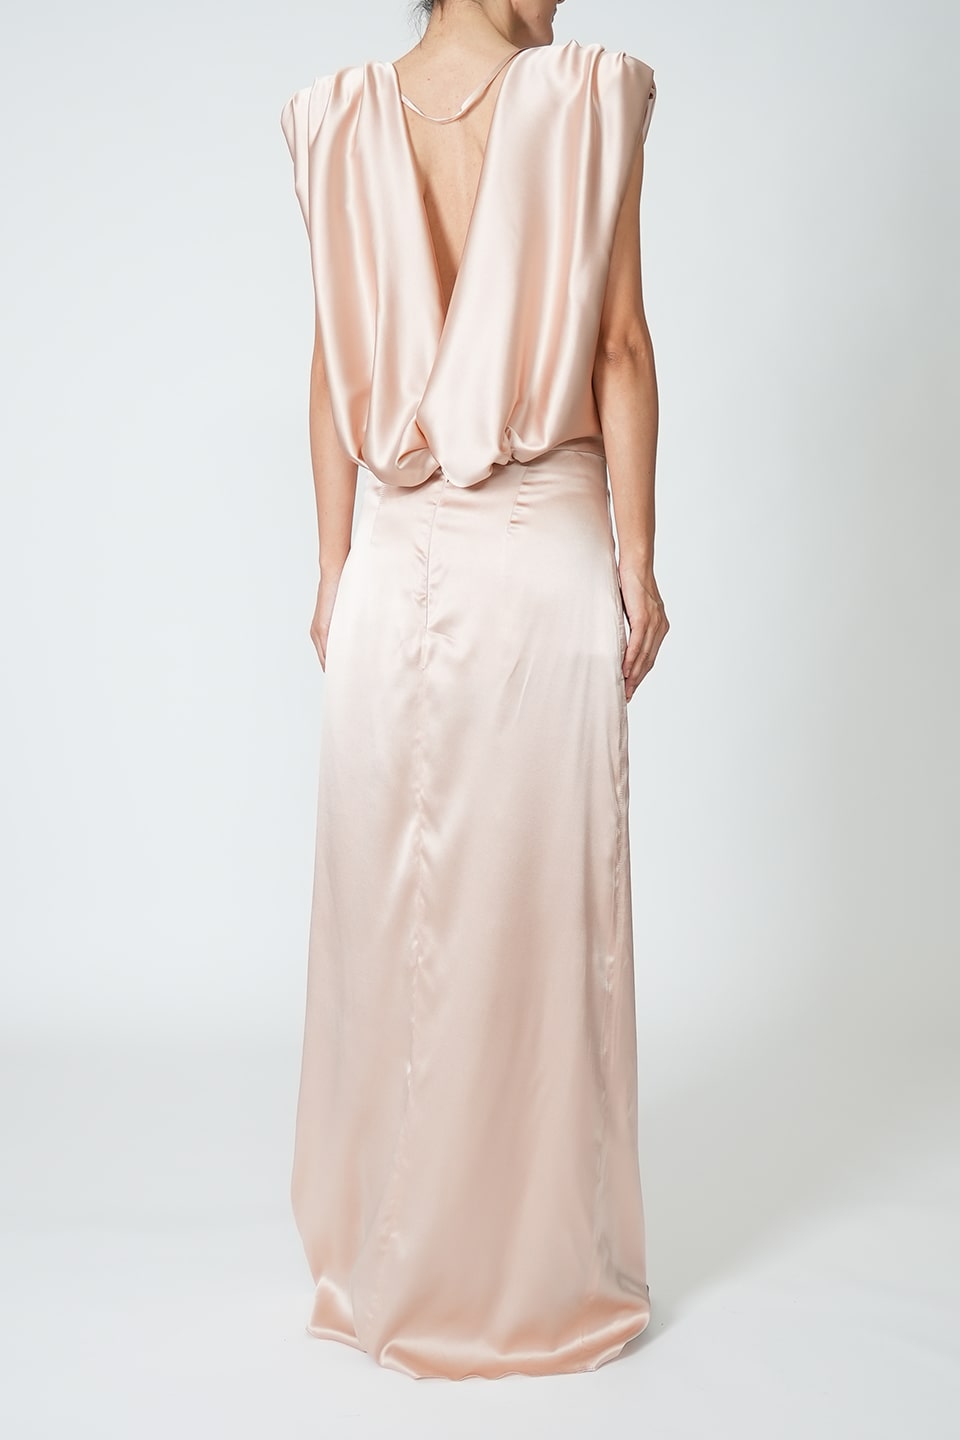 Thumbnail for Product gallery 5, Elegant maxi dress blush, free delivery in UAE